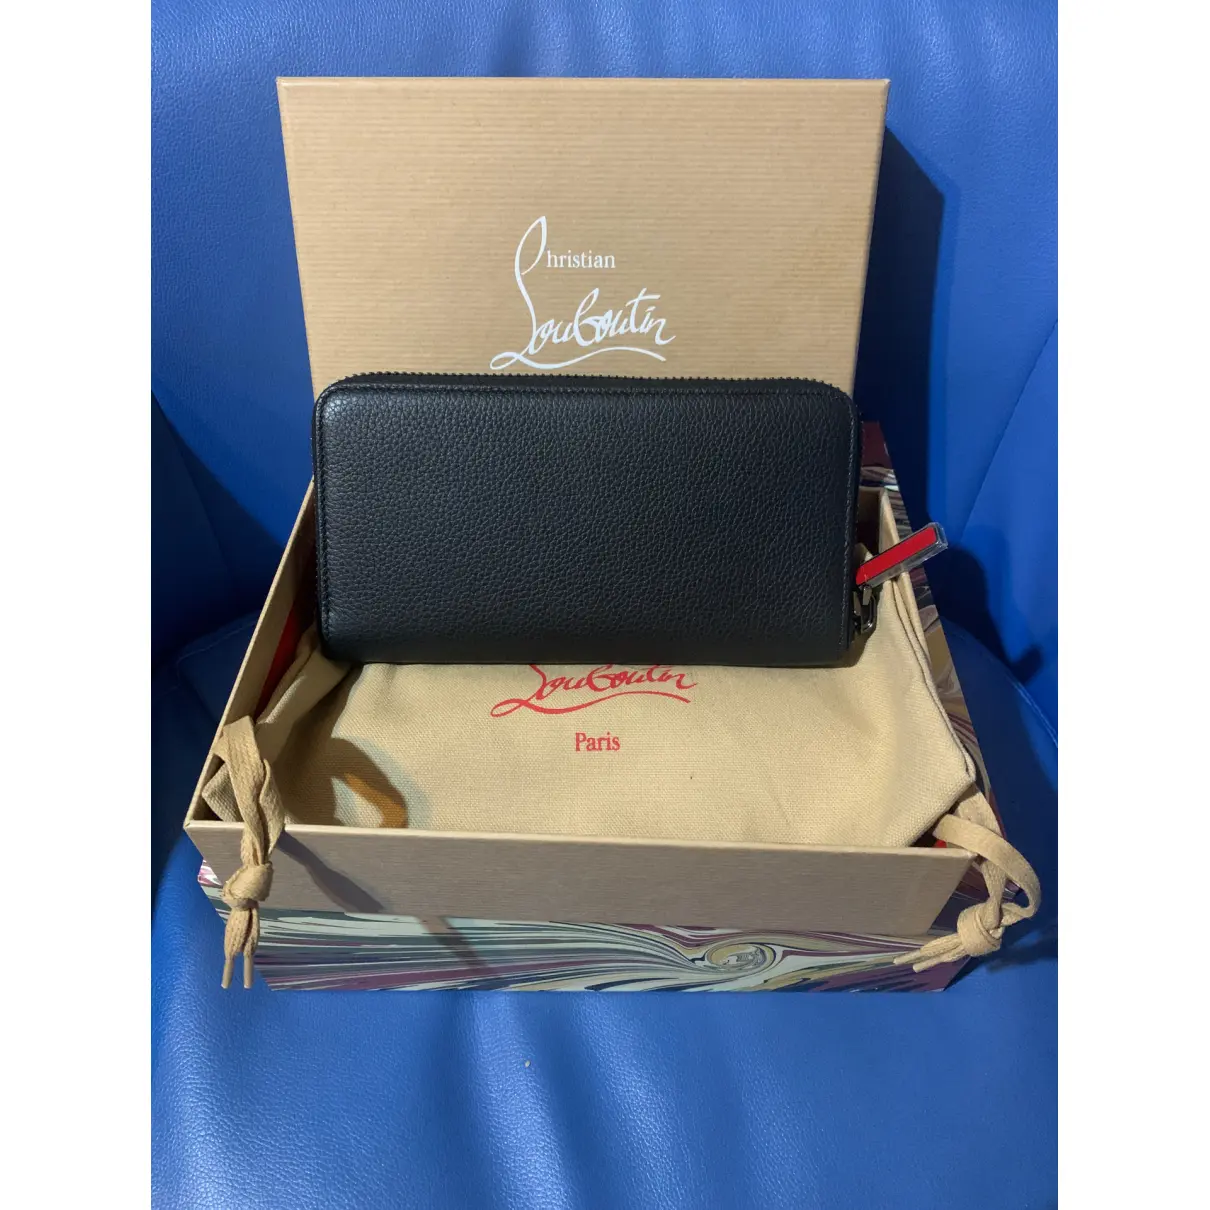 Buy Christian Louboutin Leather wallet online